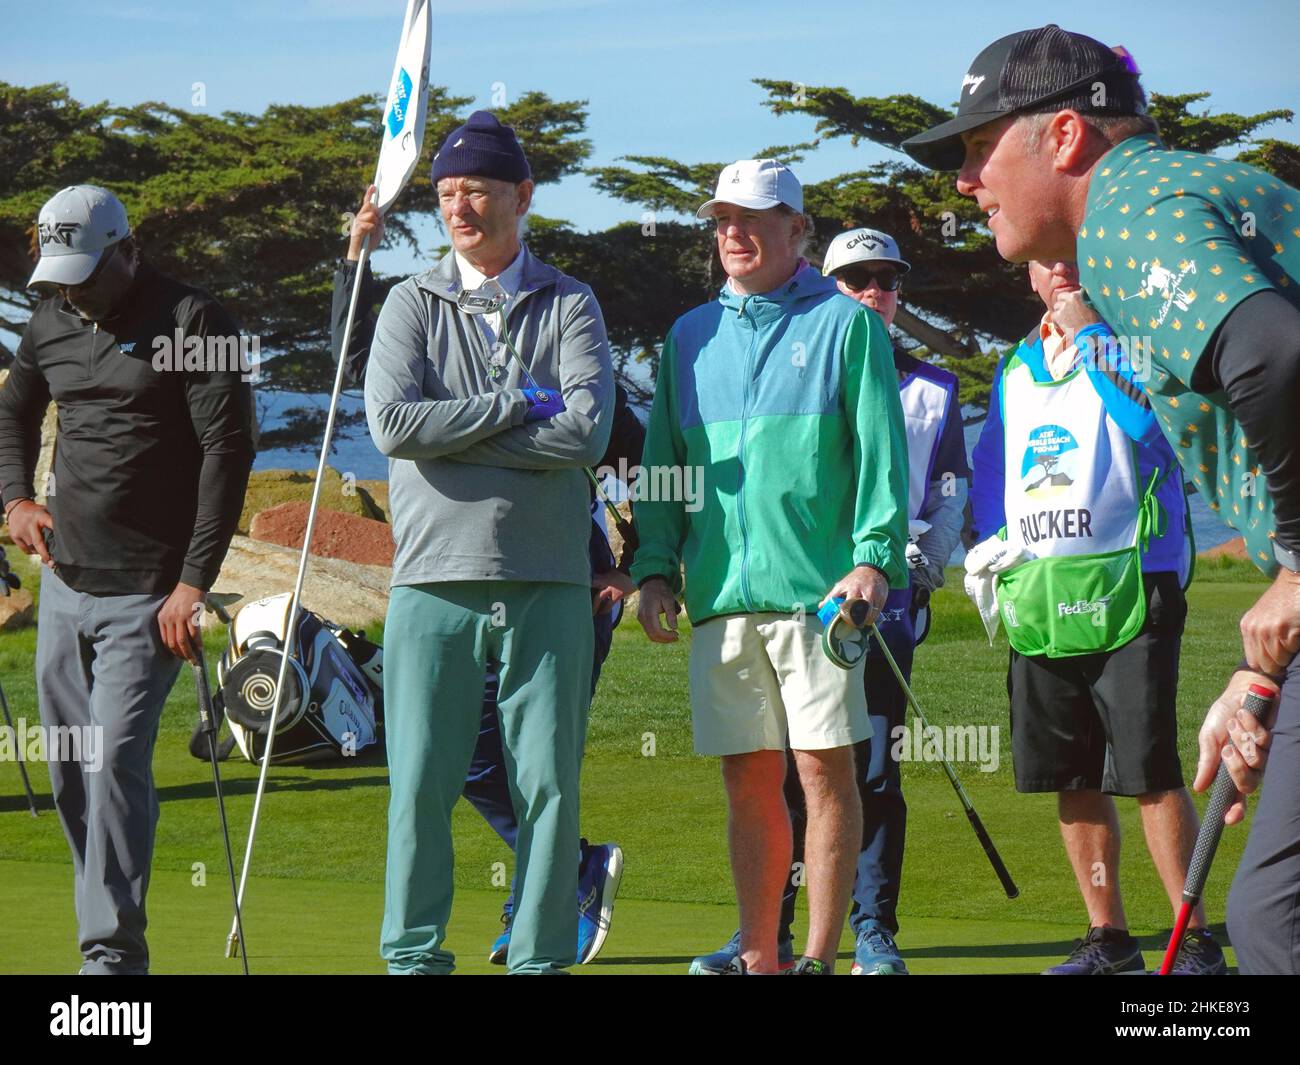 Bill Murray and Darius Rucker watch action on the 6th green at Monterey Peninsula Golf Club during the first round of the ATandT Pro-Am PGA Tour golf event Monterey Peninsula, California, USA